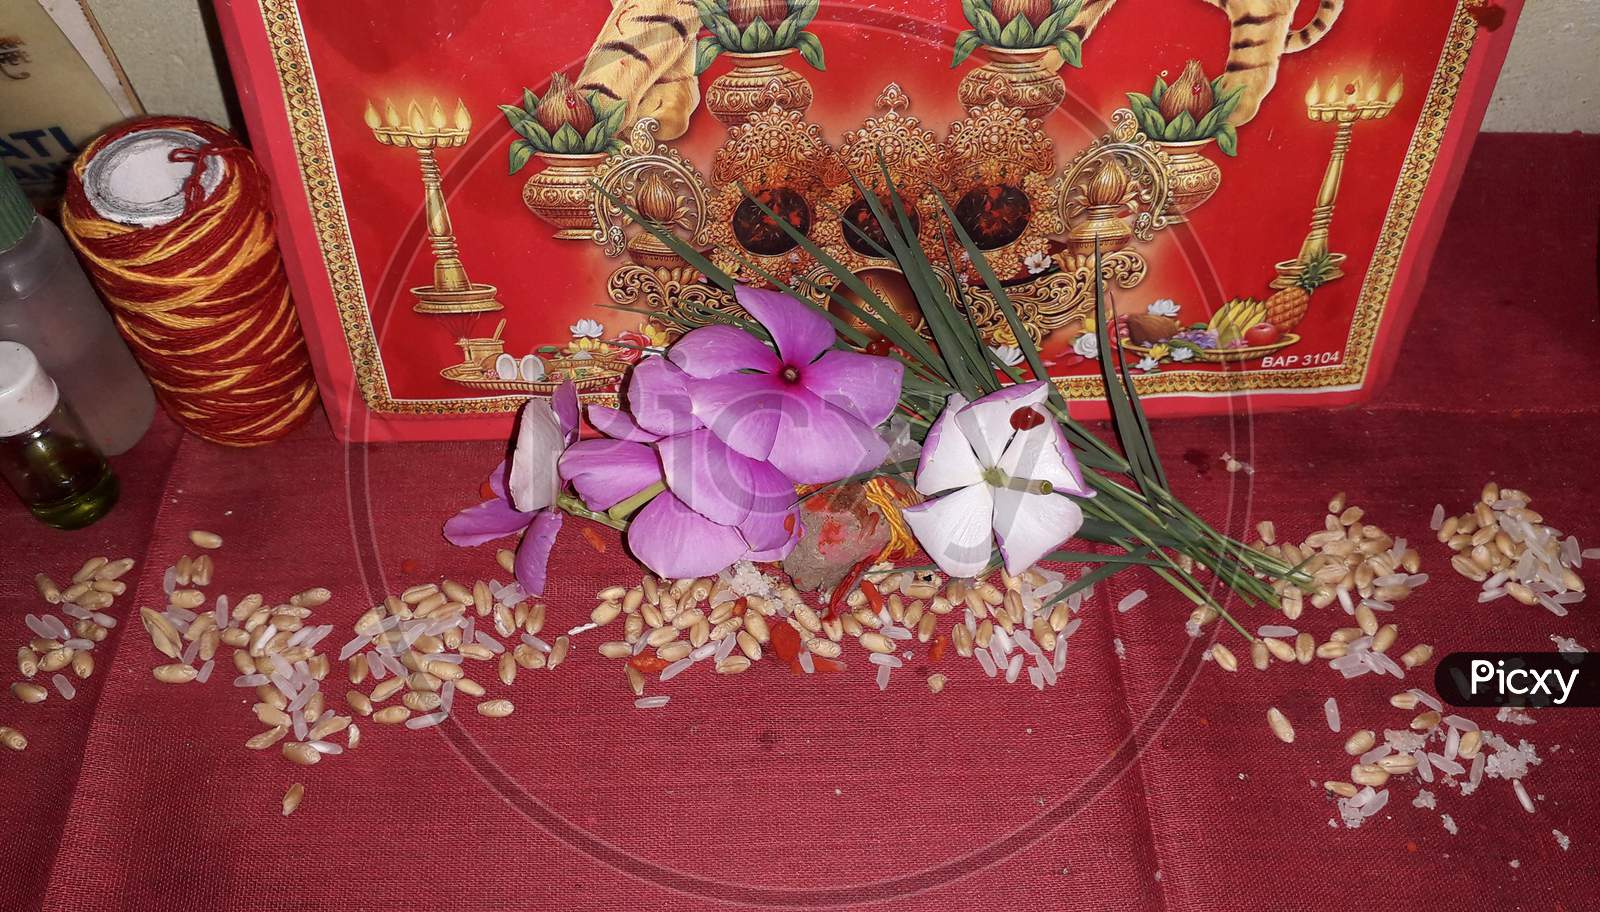 Flowers and grains in front of Hindu goddess 'Durga' in 'Navratri' / pledge place of Hindus / devotion to Goddess